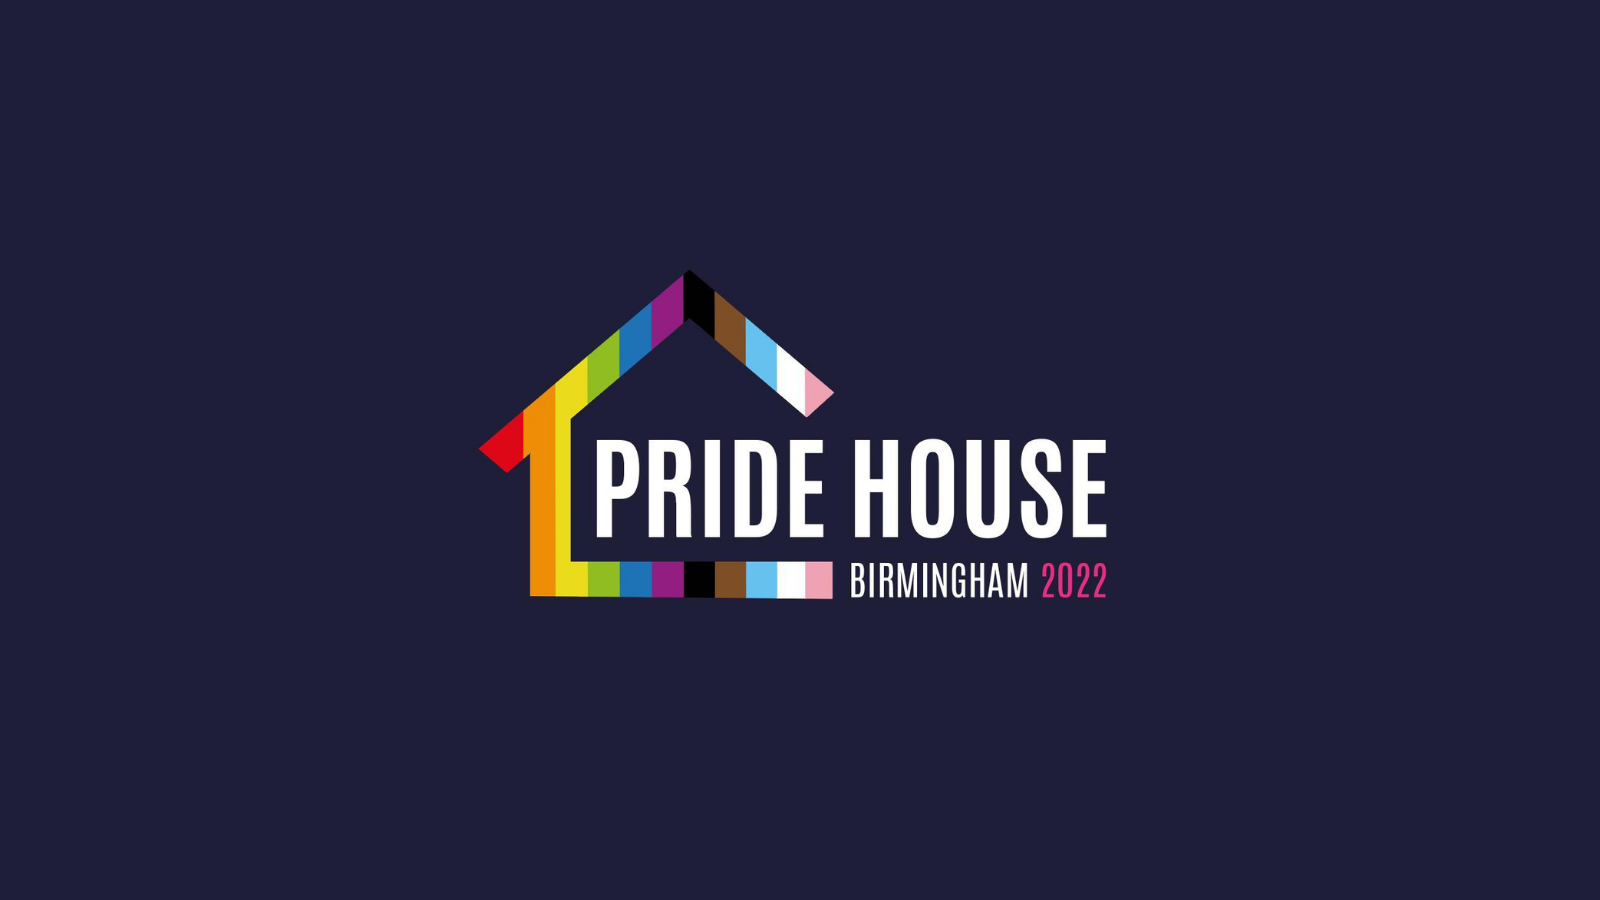 Pride House Birmingham has been launched for the Birmingham 2022 Commonwealth Games ©Pride House